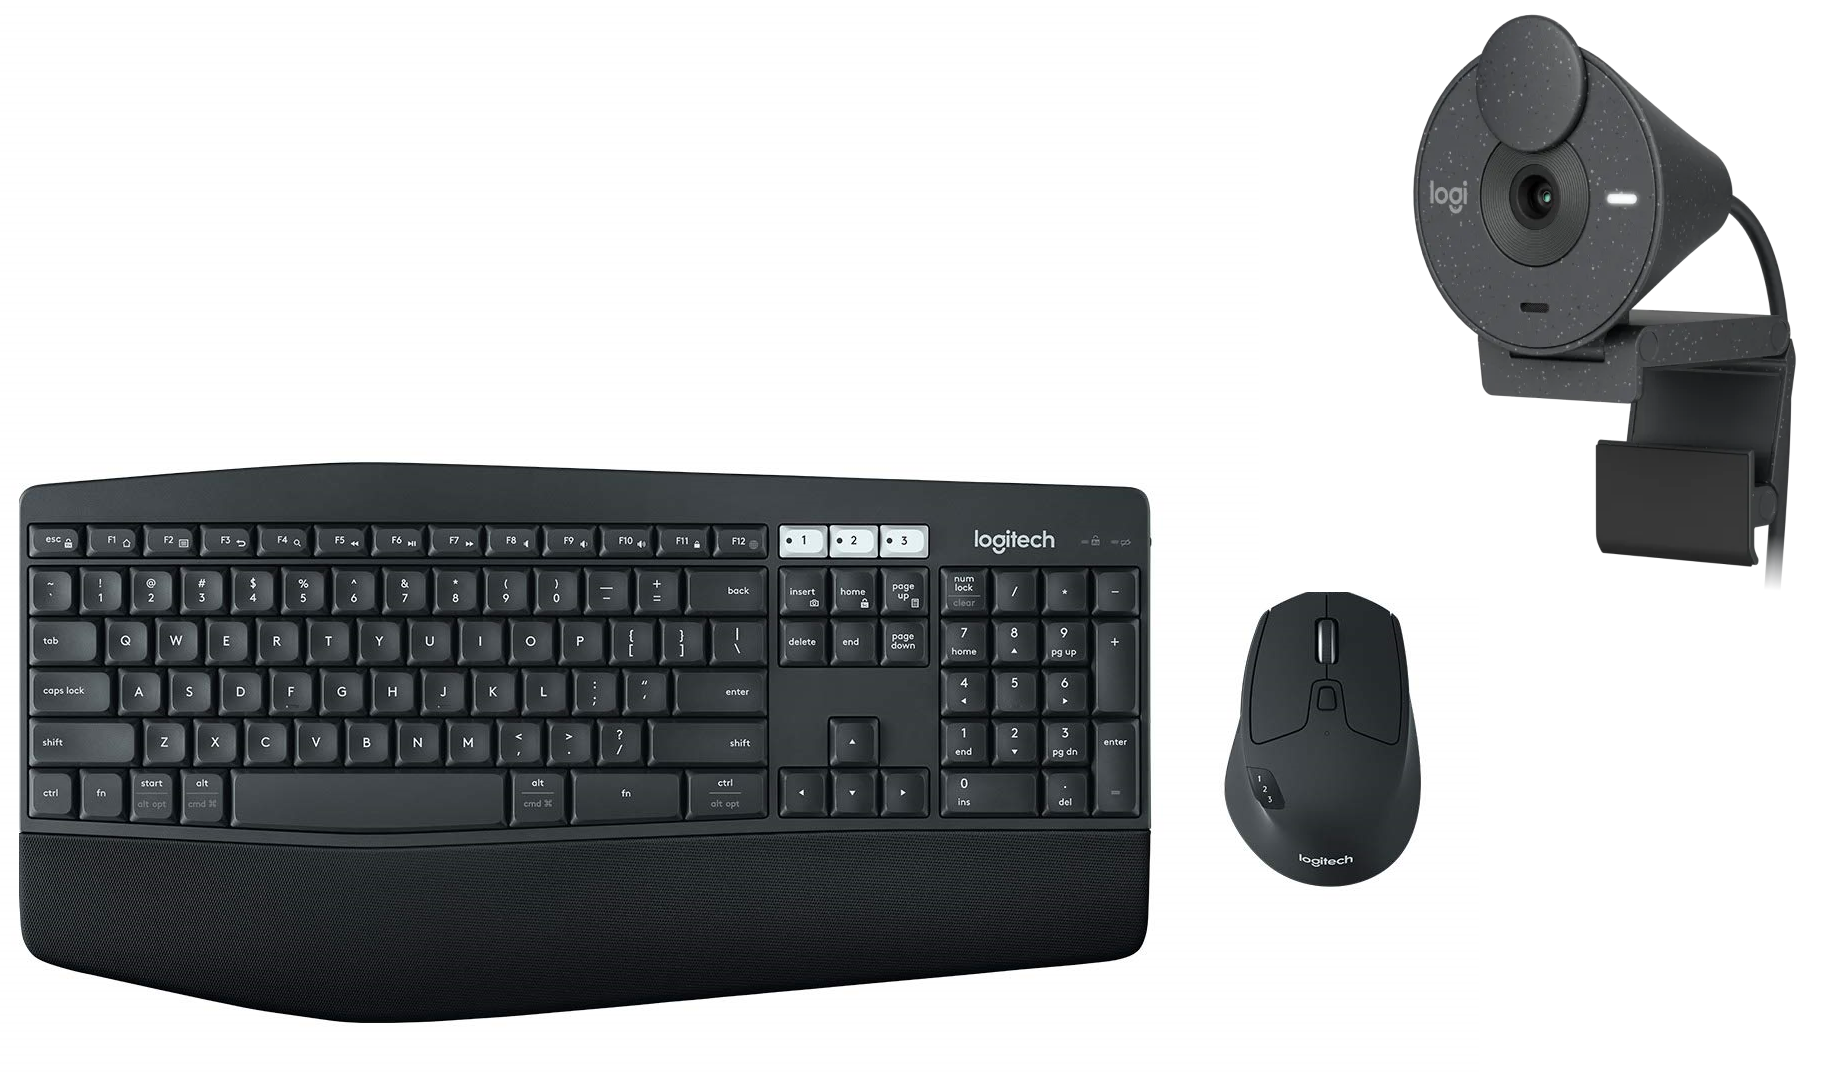 Logitech MK850 Performance Wireless Keyboard and Mouse and Logitech Brio 300 A 1080p webcam Combo